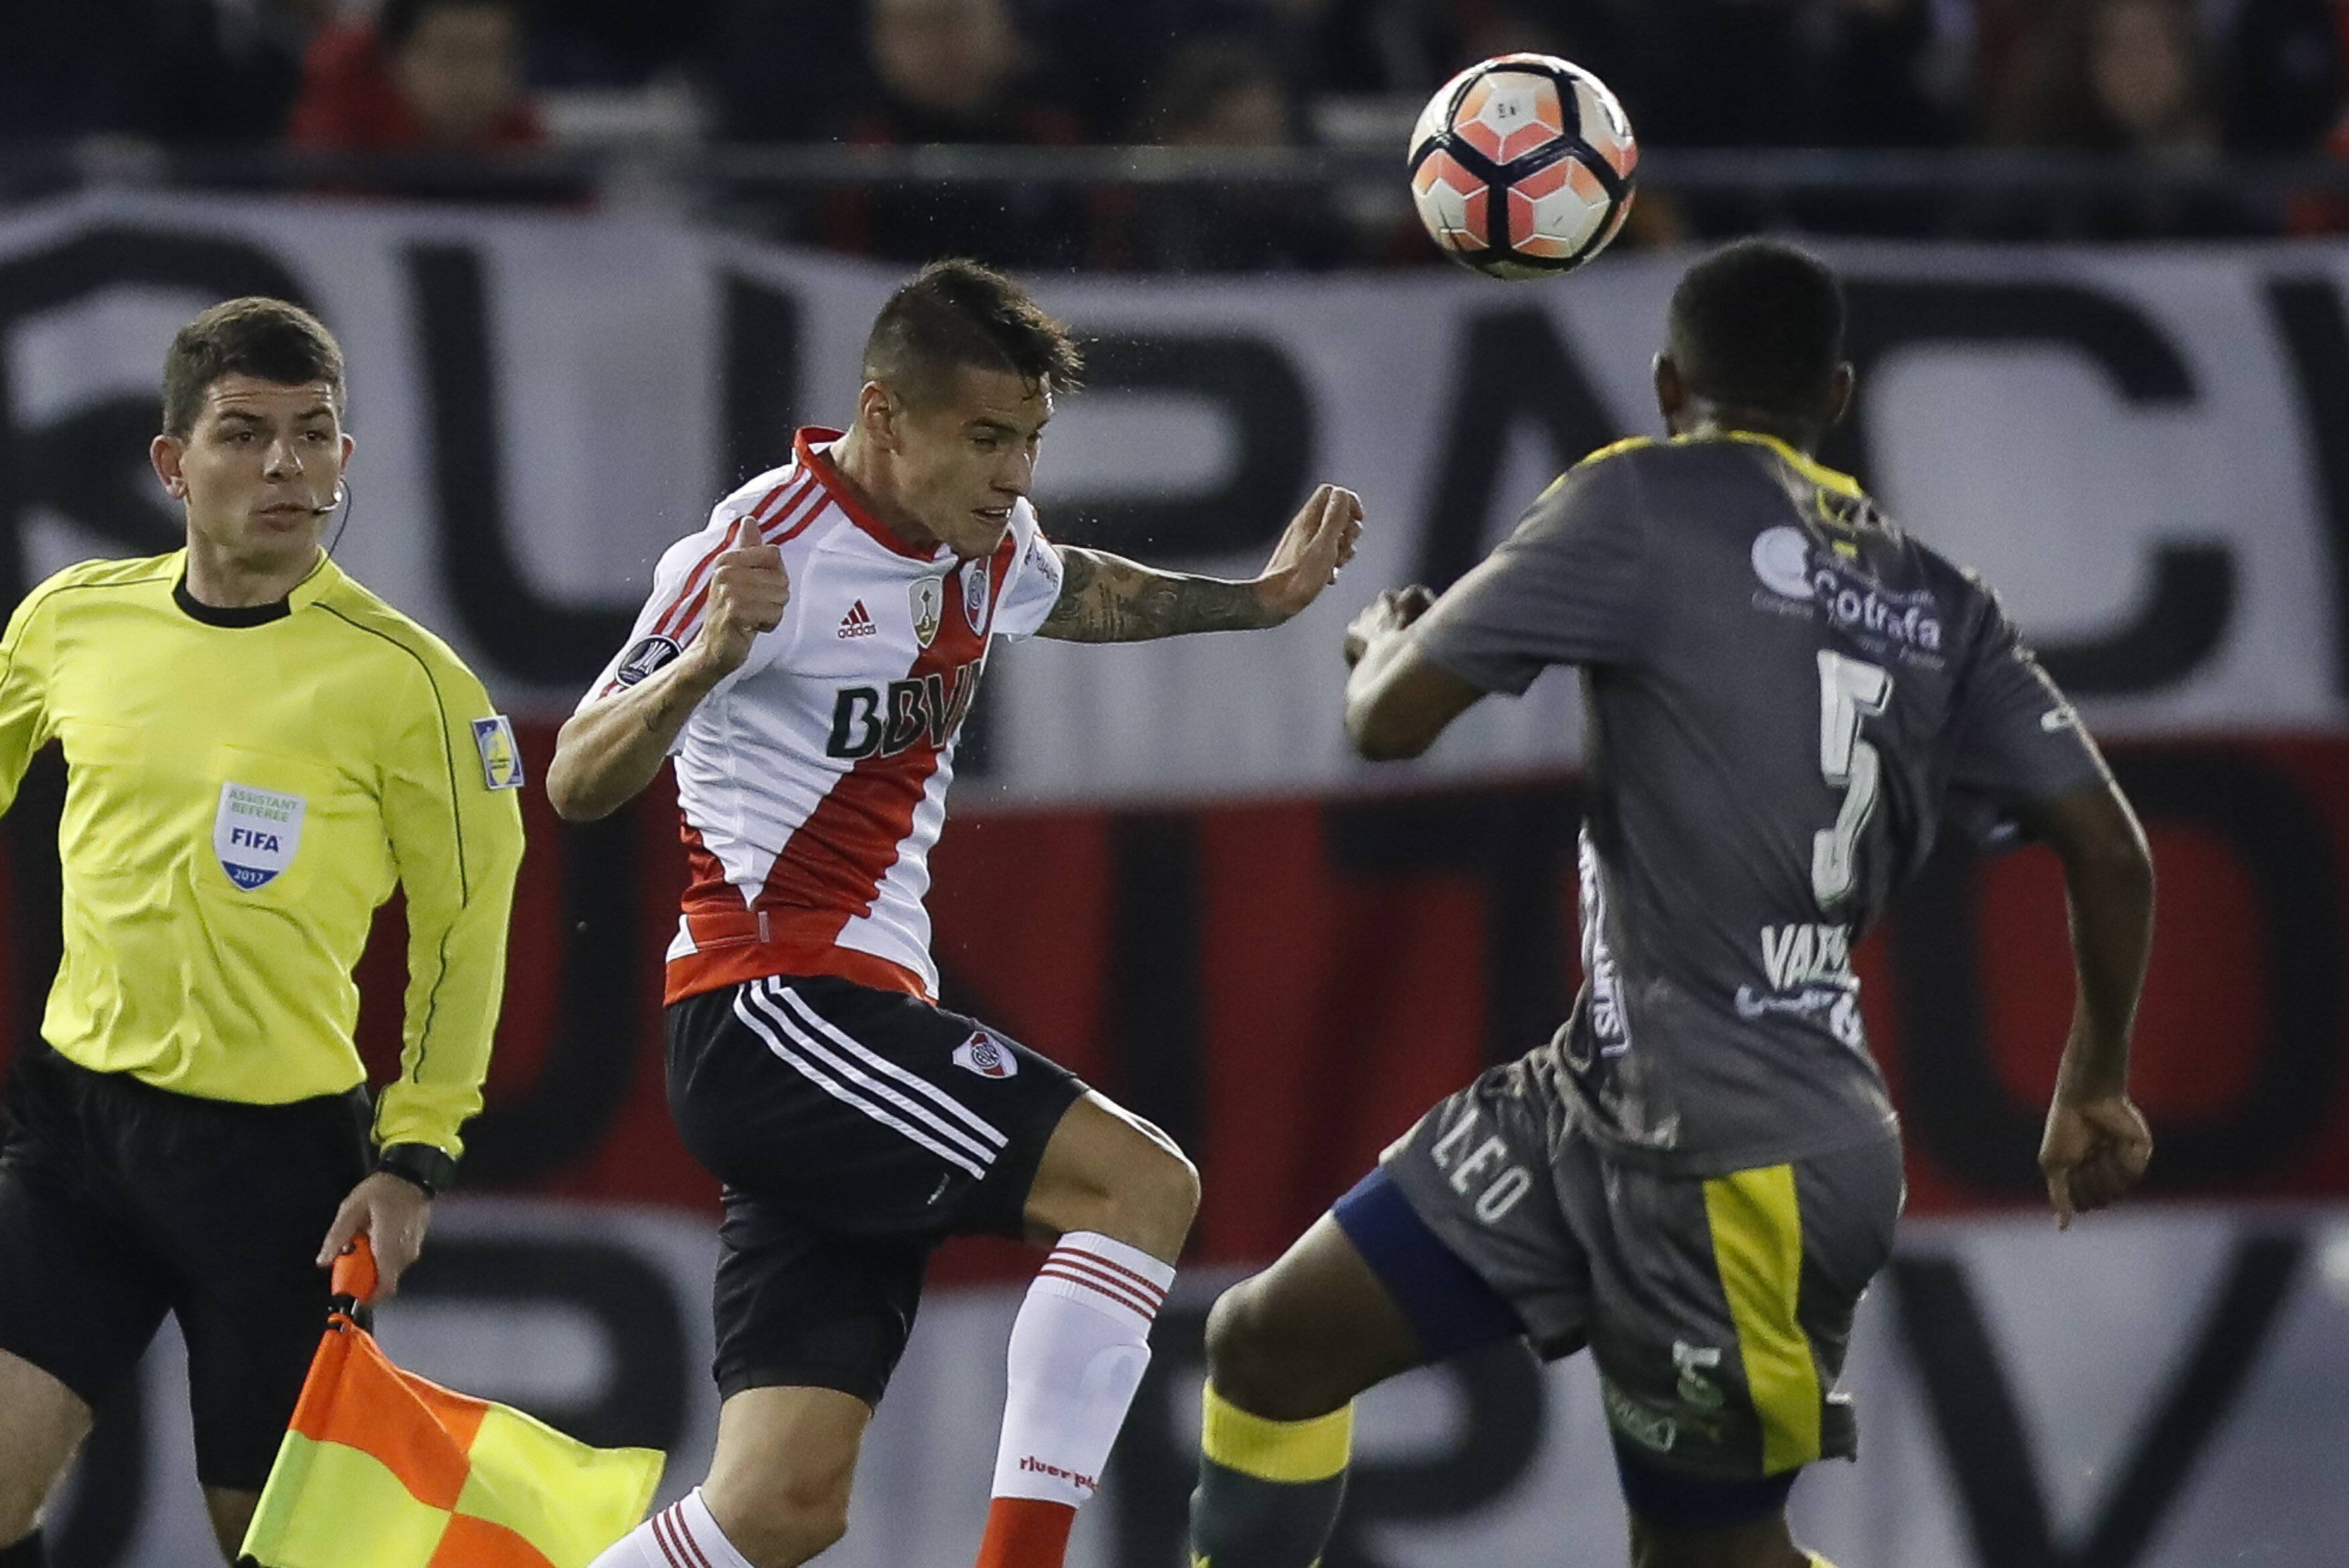 River Plate S Carlos Auzqui C Vies For The Ball With Juan David Valencia R Of Independiente Mede